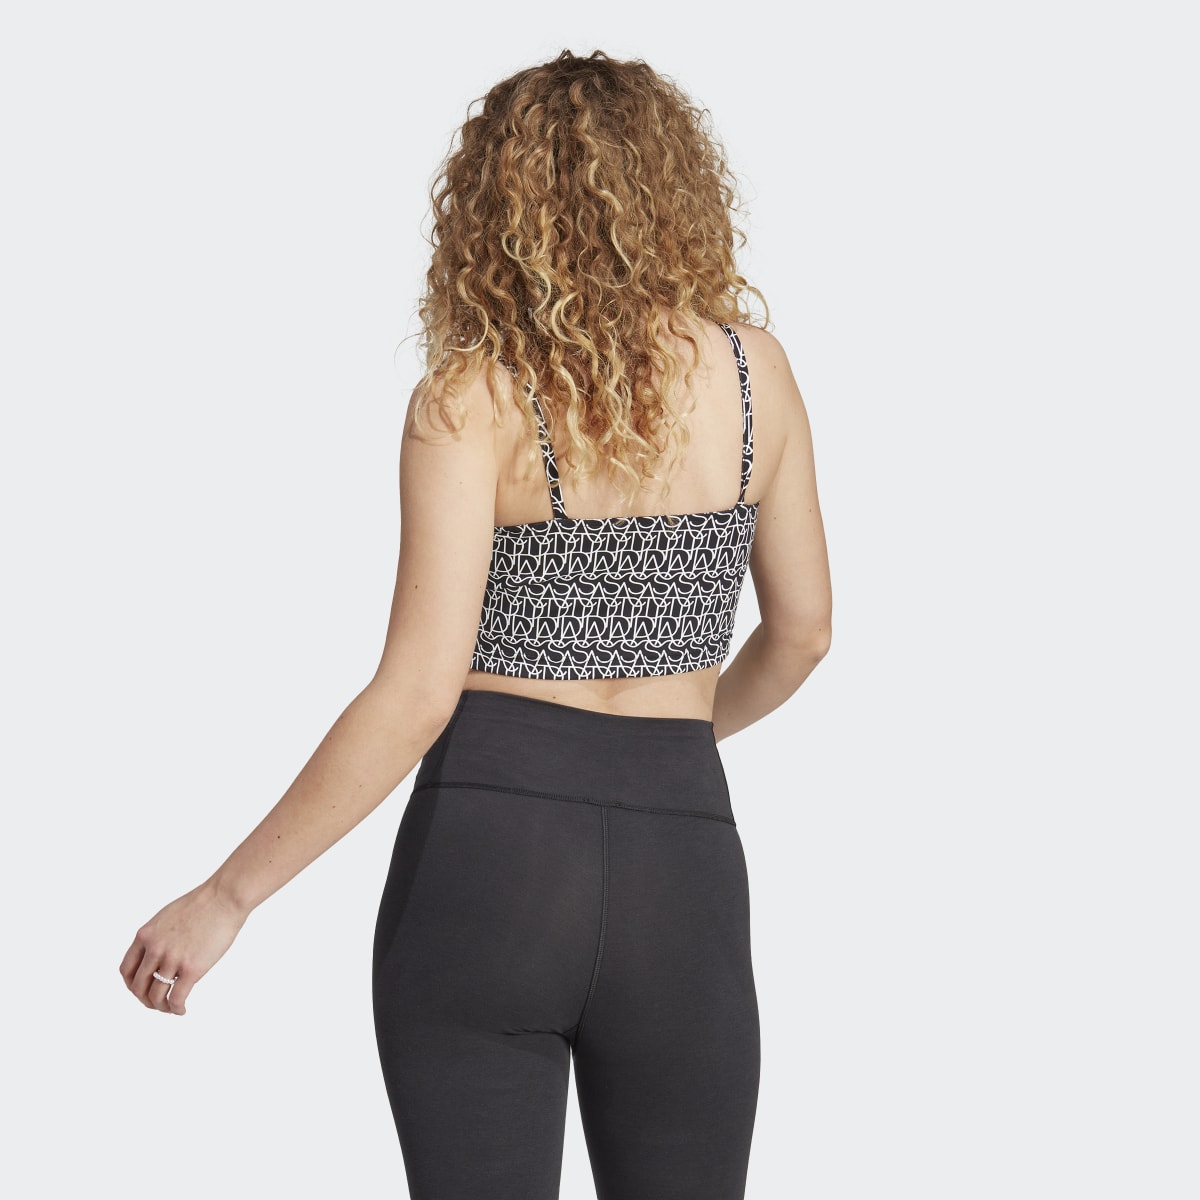 Adidas Allover adidas Graphic Corset-Inspired Atlet. 4